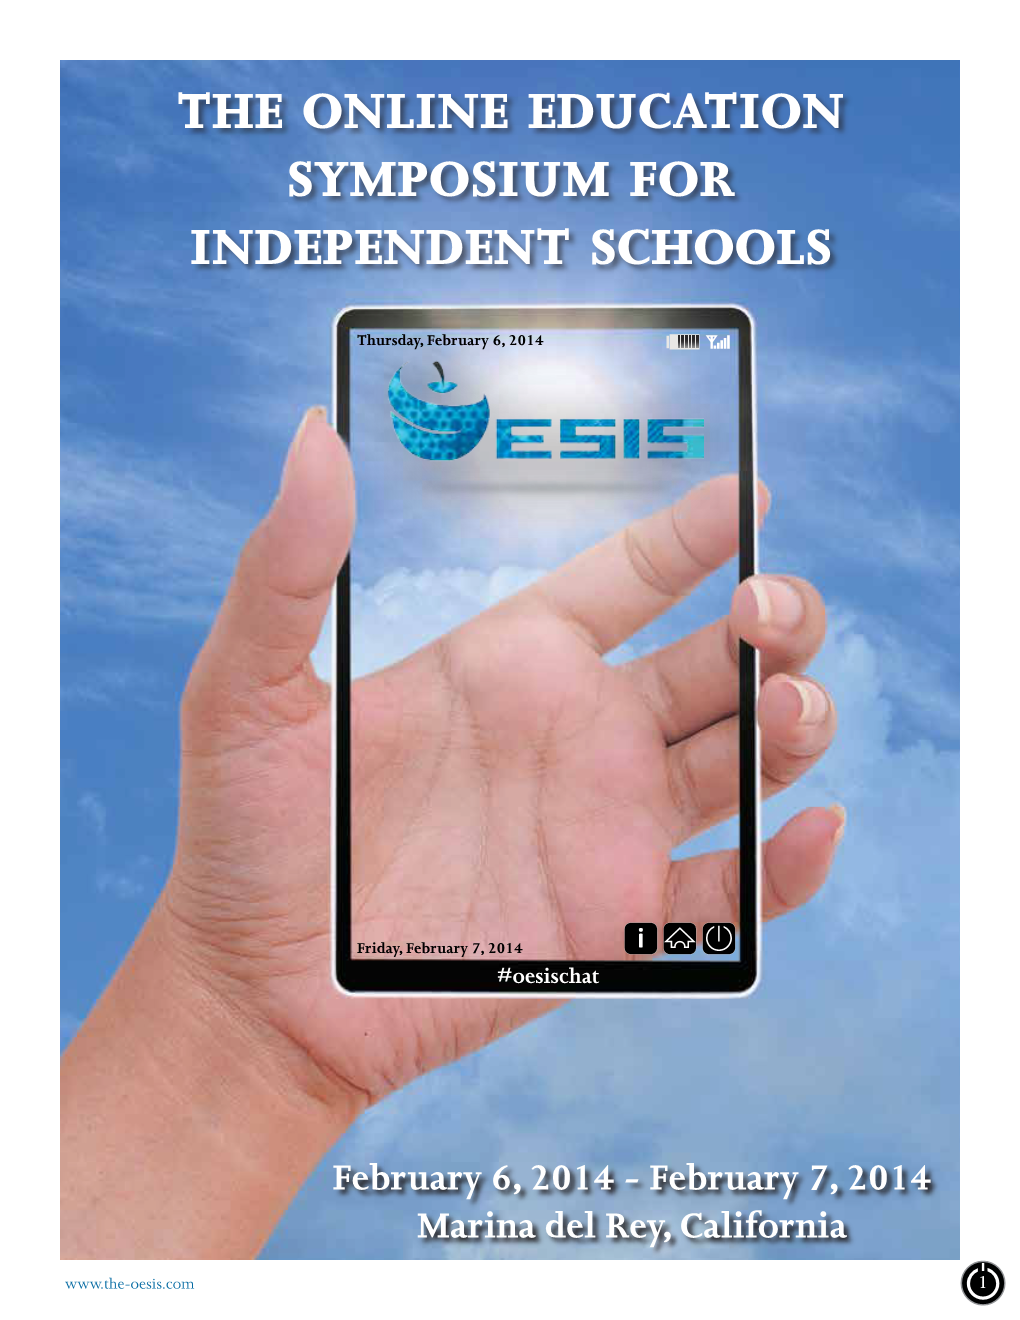 The Online Education Symposium for Independent Schools